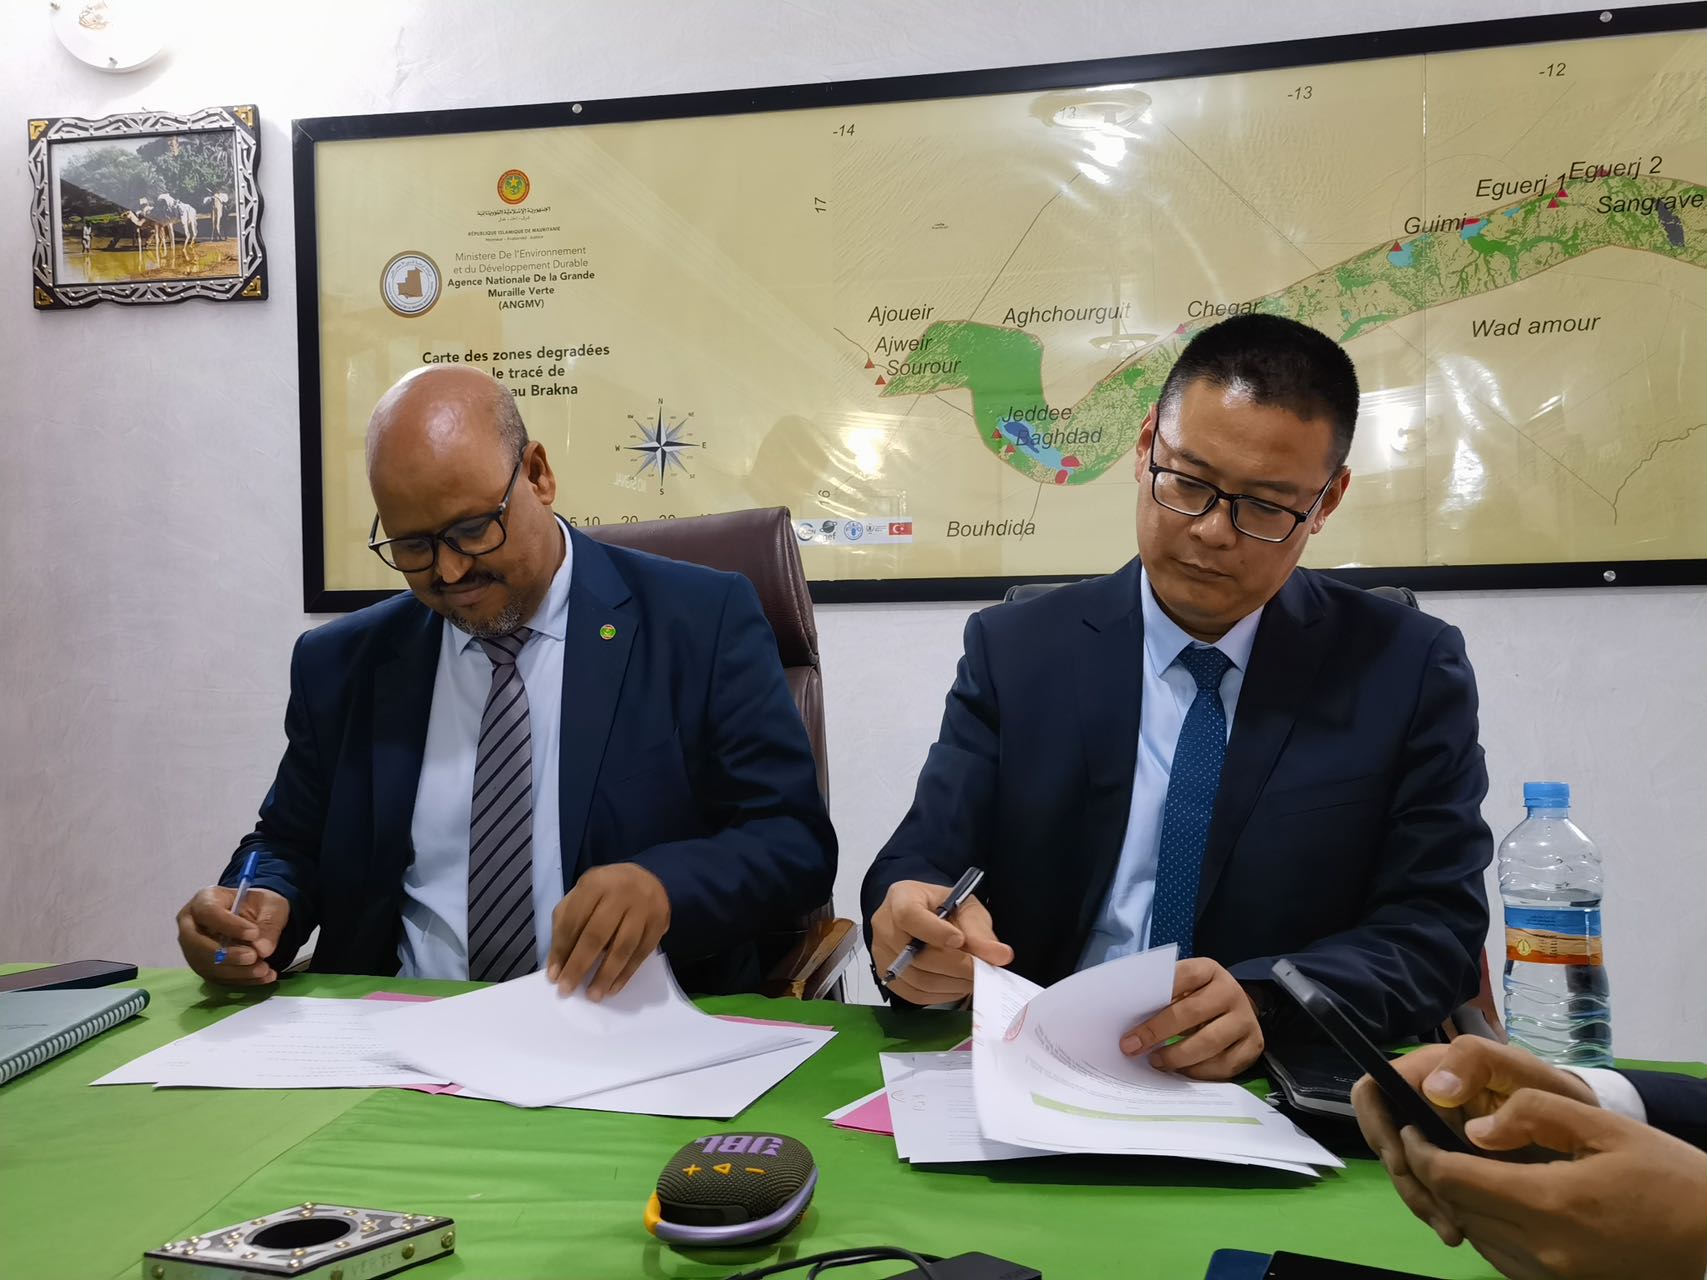 Sinoway Forest and the Mauritania Green Great Wall Agency have joined hands in collaboration to jointly promote ecological restoration in the northwest of Africa.